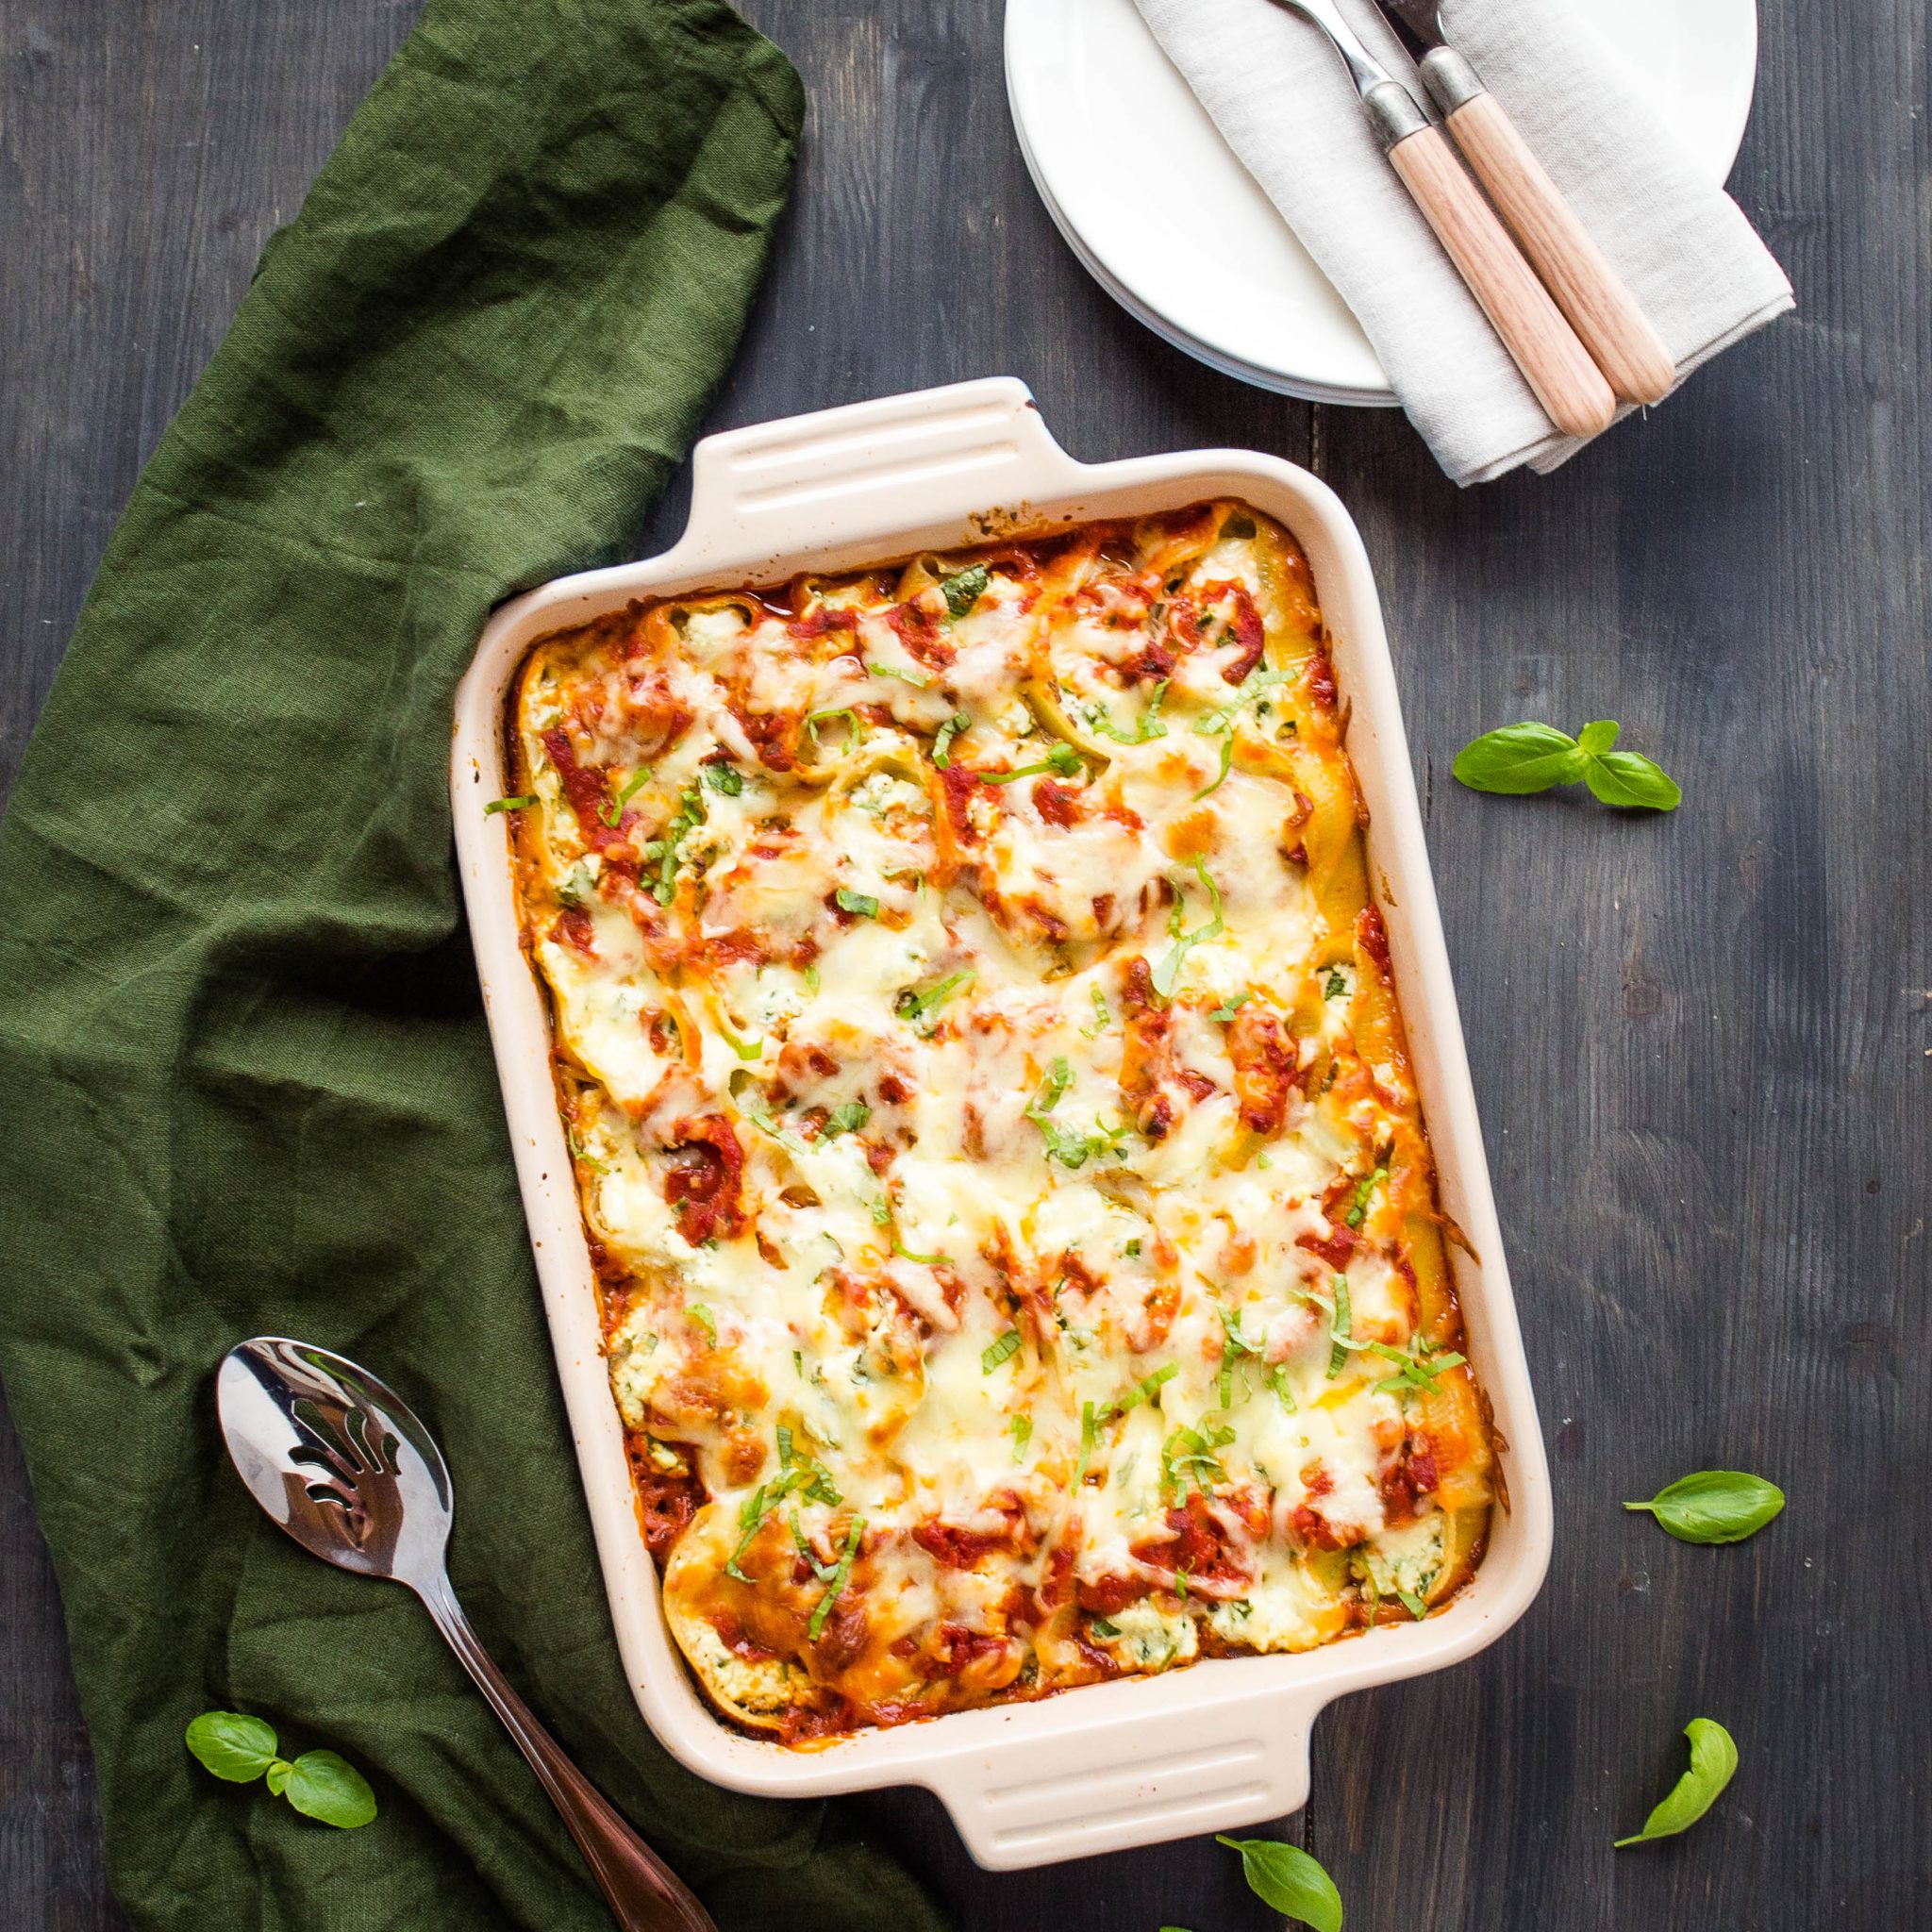 casserole dish of stuffed shells with spinach, ricotta cheese, and fresh